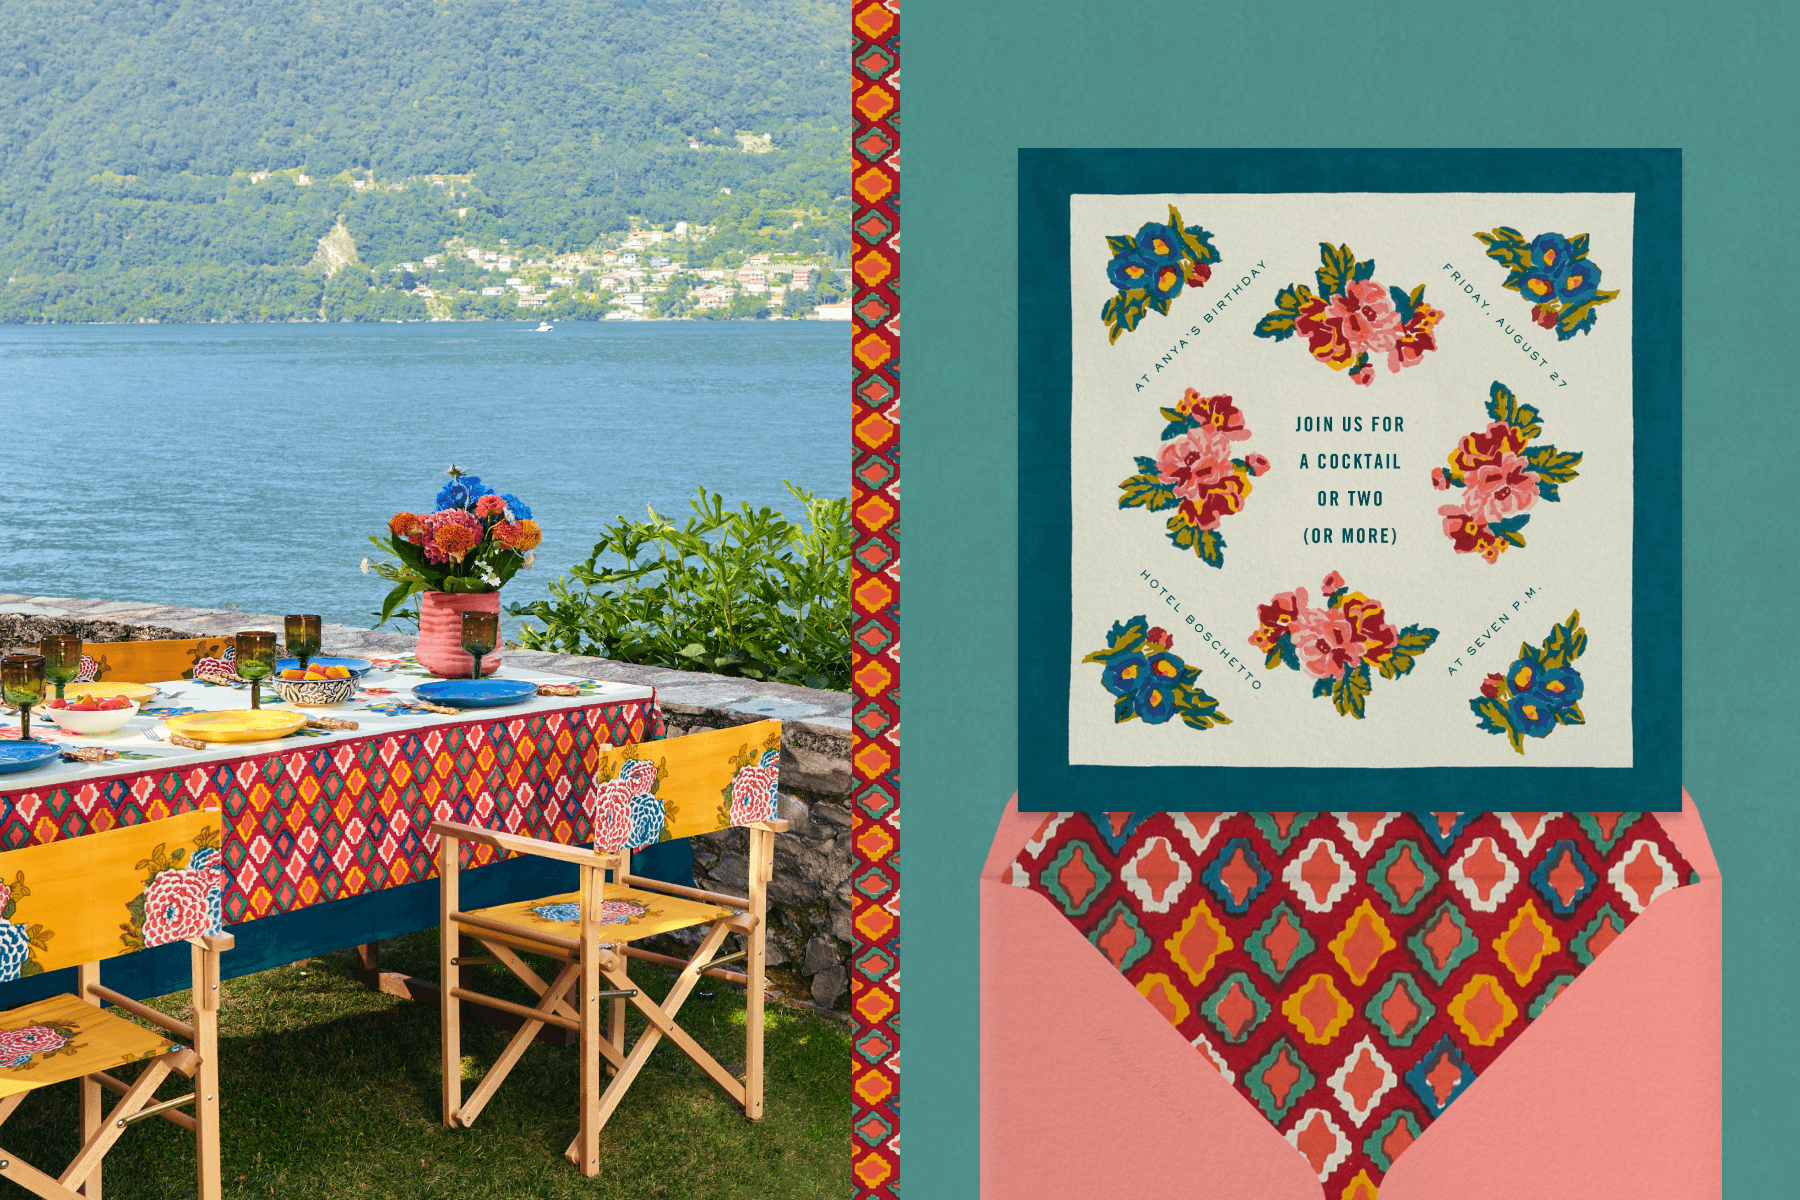 Left: Scenic table set outdoors with a view of the ocean. Right: Off-white invitation with a pink and blue floral diamond pattern. 